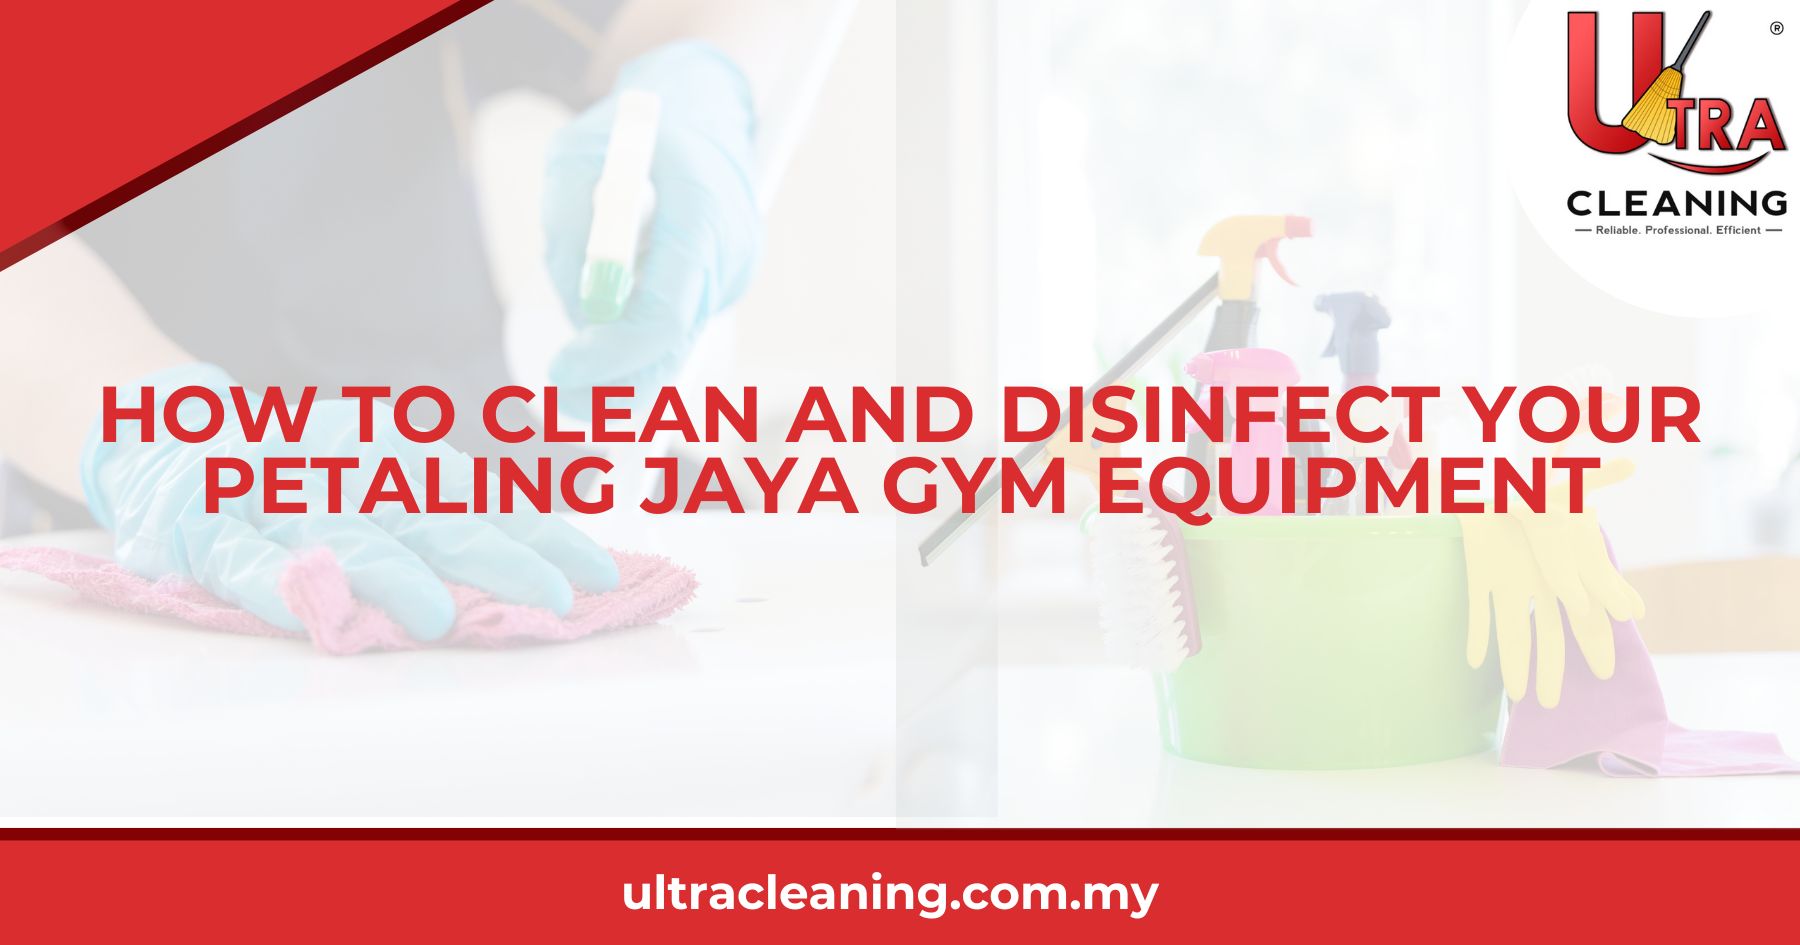 How to Clean and Disinfect Your Petaling Jaya Gym Equipment